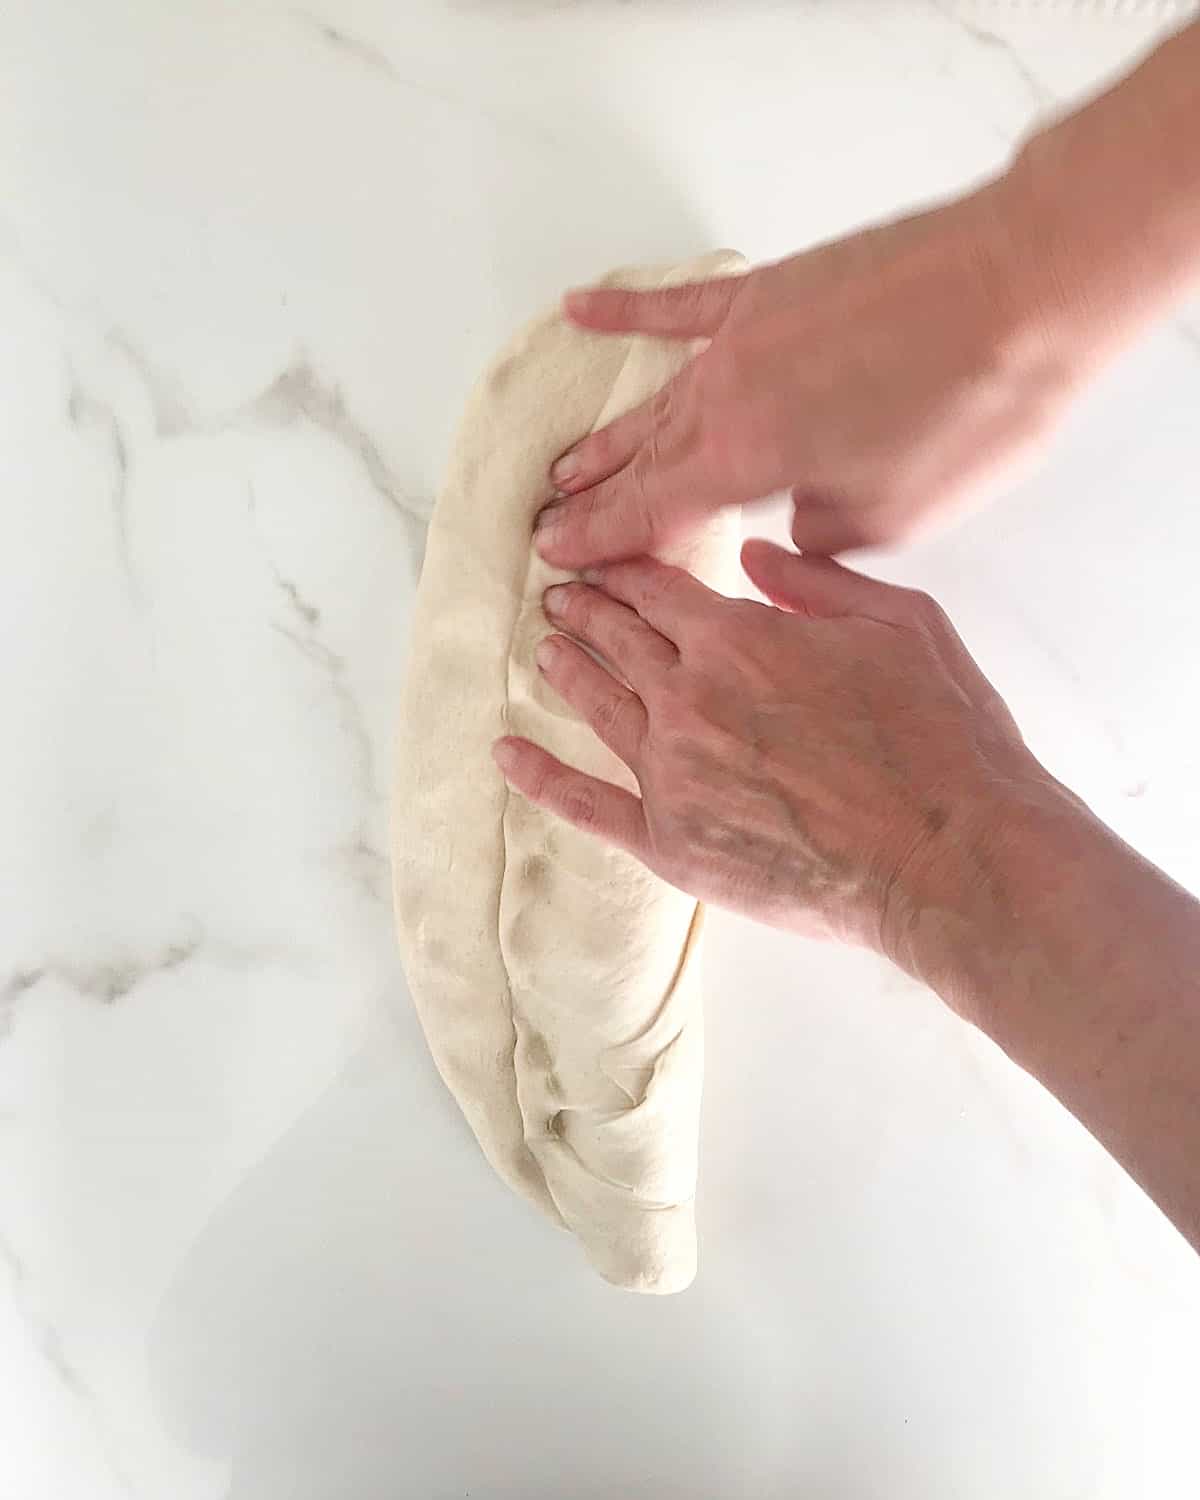 Hands forming a baguette on a white marble surface.